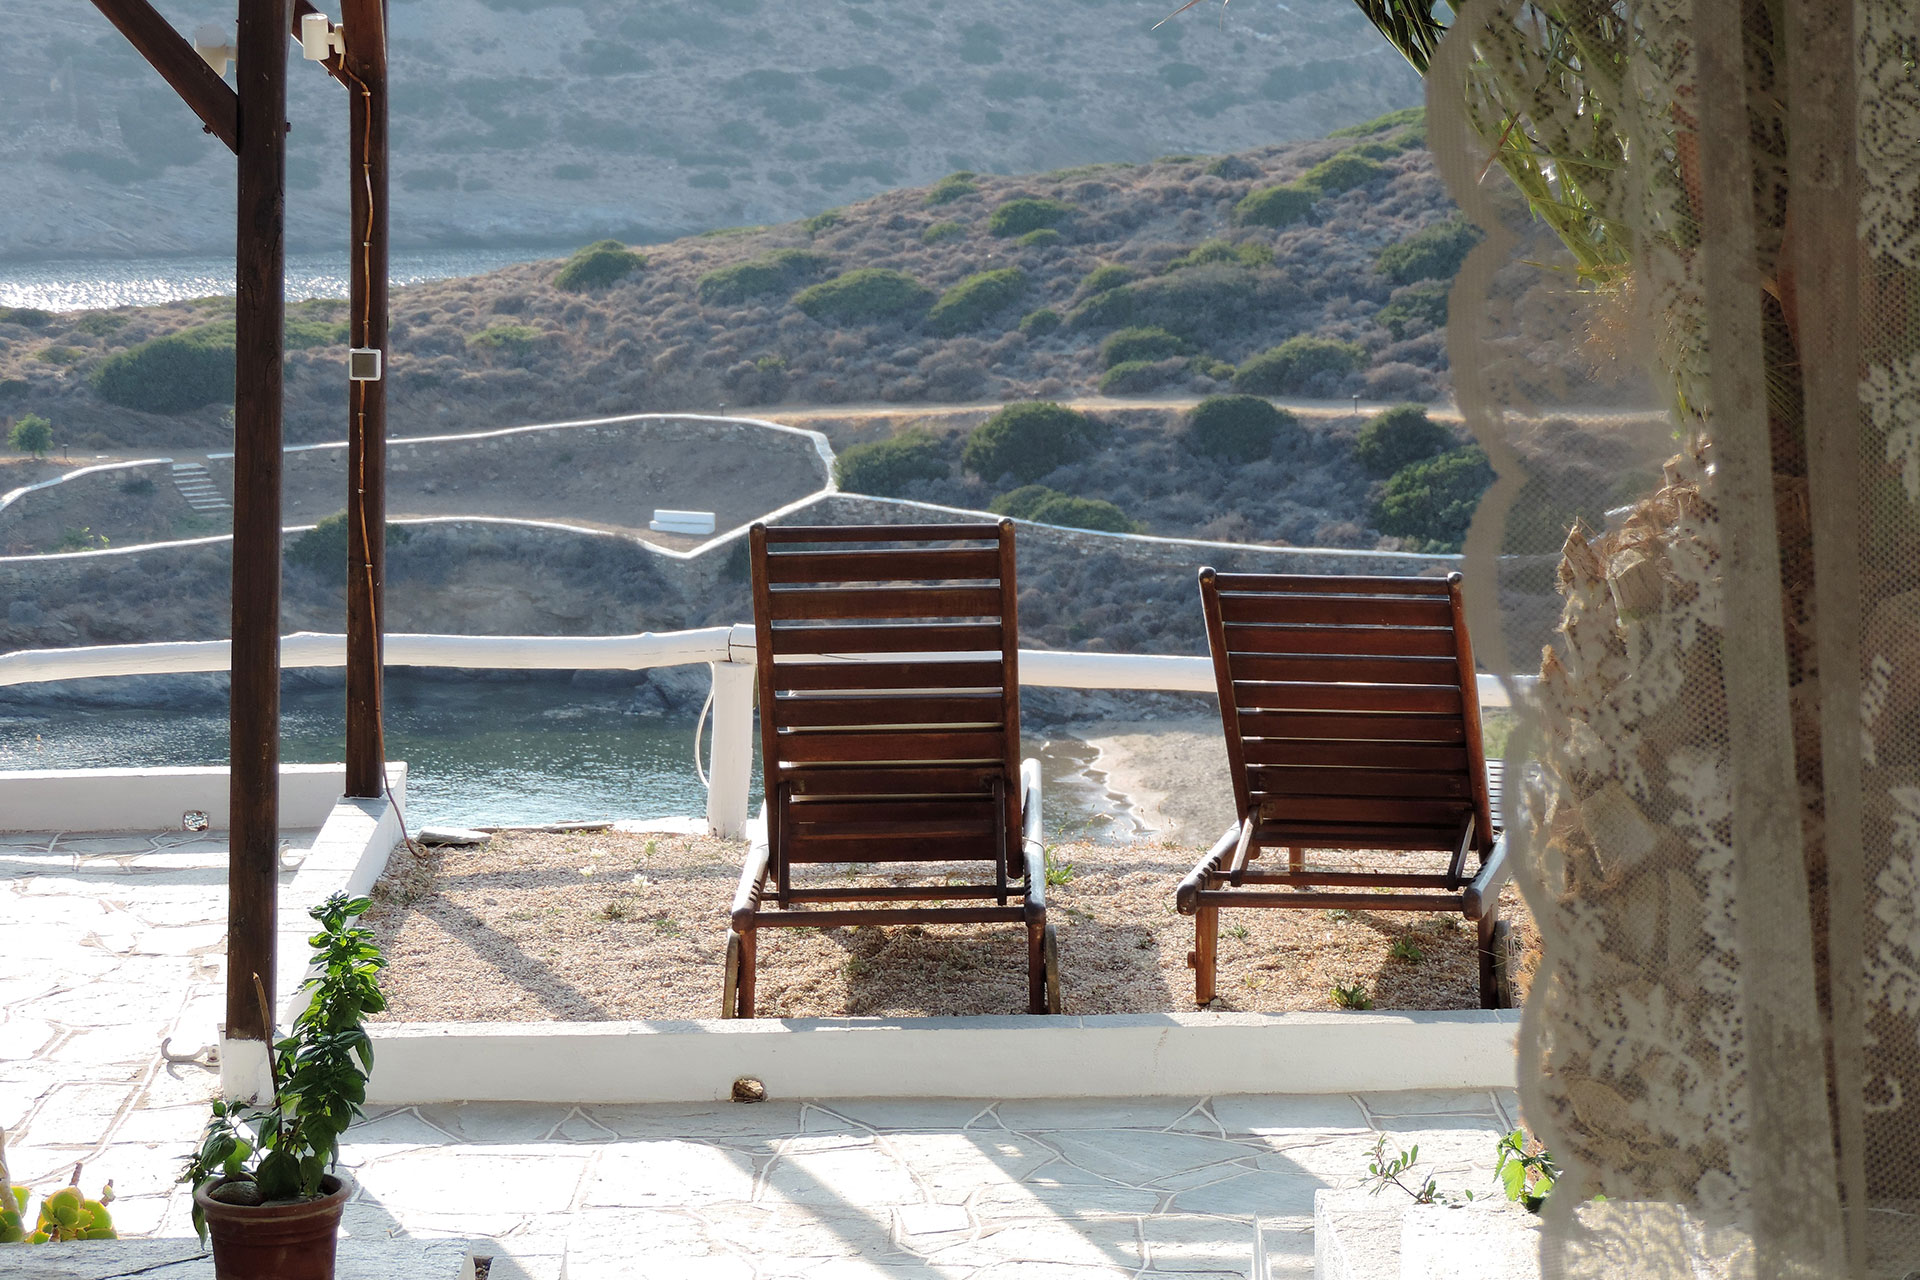 The patio of Studios Almira and Rigani at Kavos, Sifnos